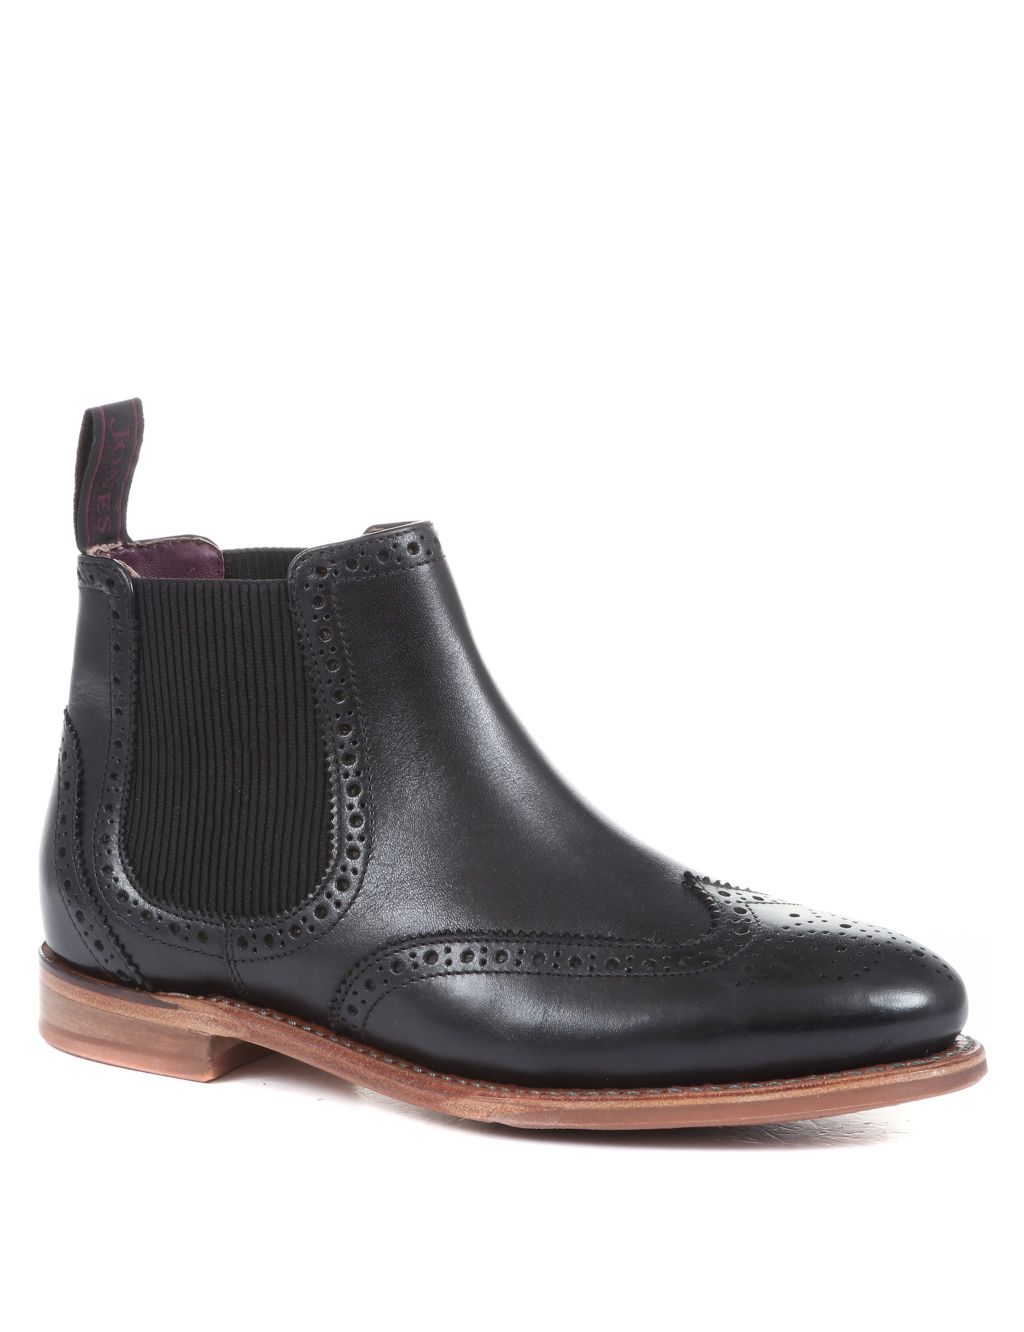 Leather Chelsea Brogue Detail Flat Boots image 2